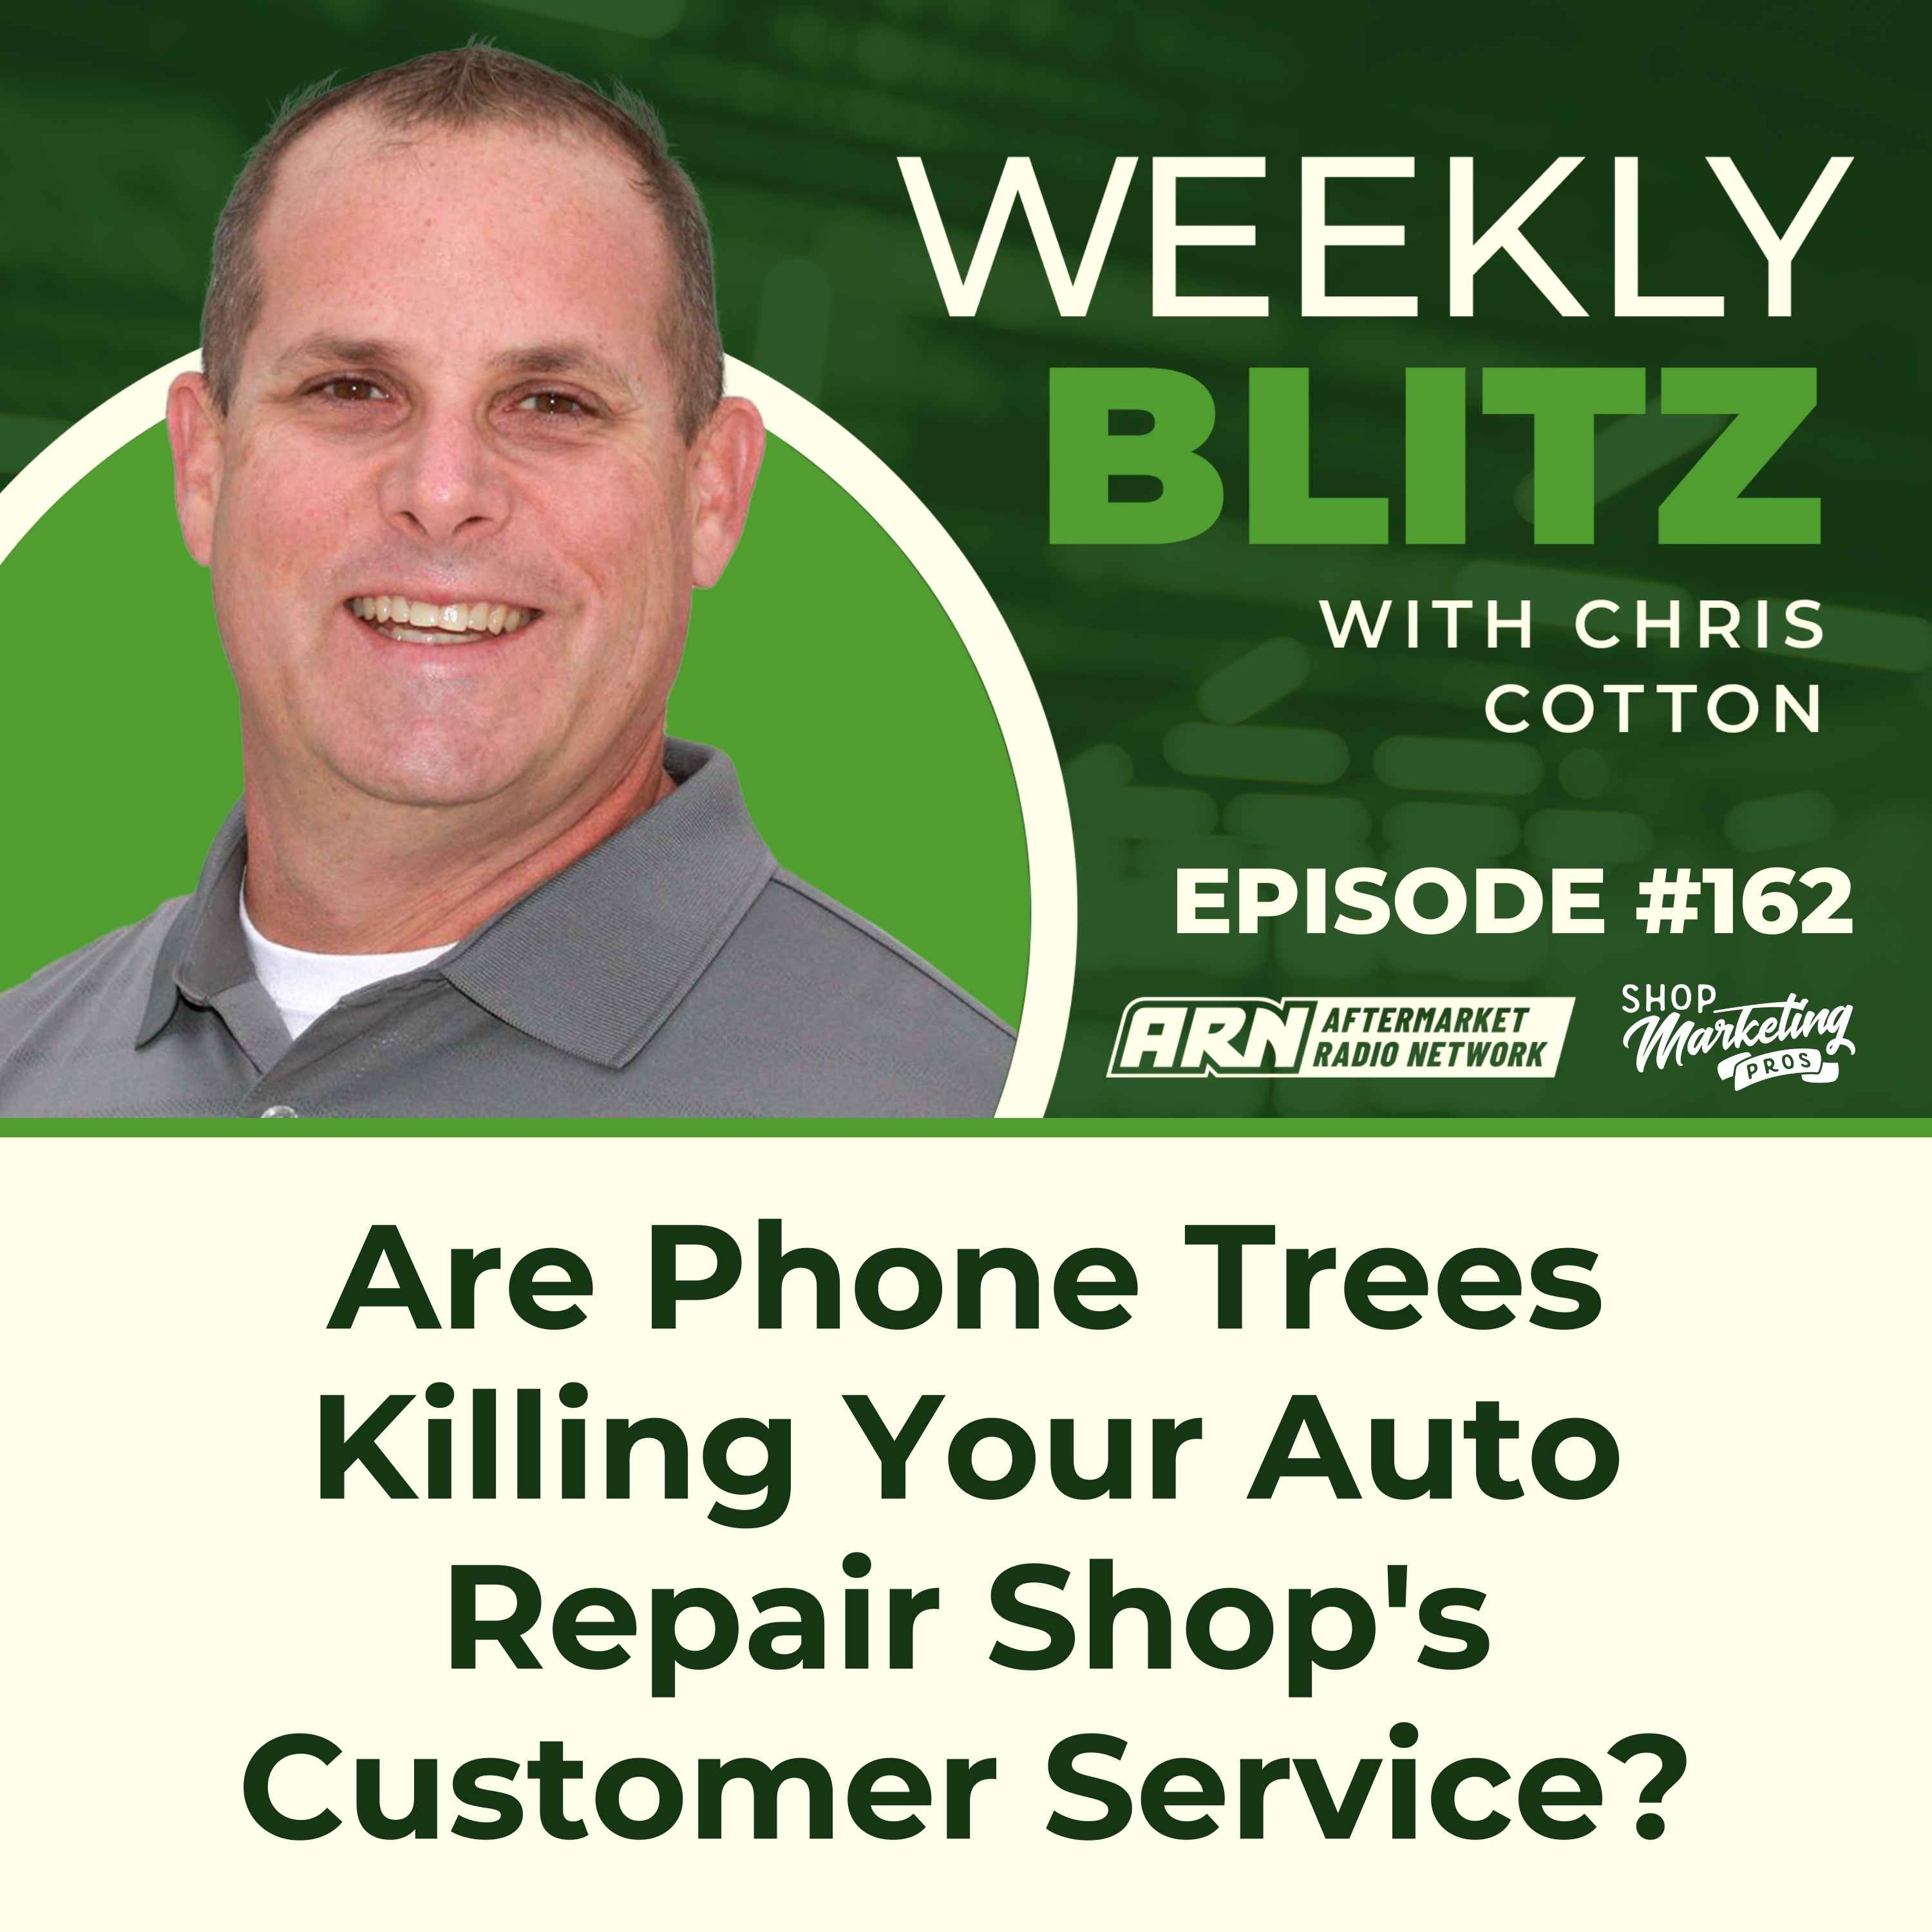 Are Phone Trees Killing Your Auto Repair Shop's Customer Service? [E162] - Chris Cotton Weekly Blitz